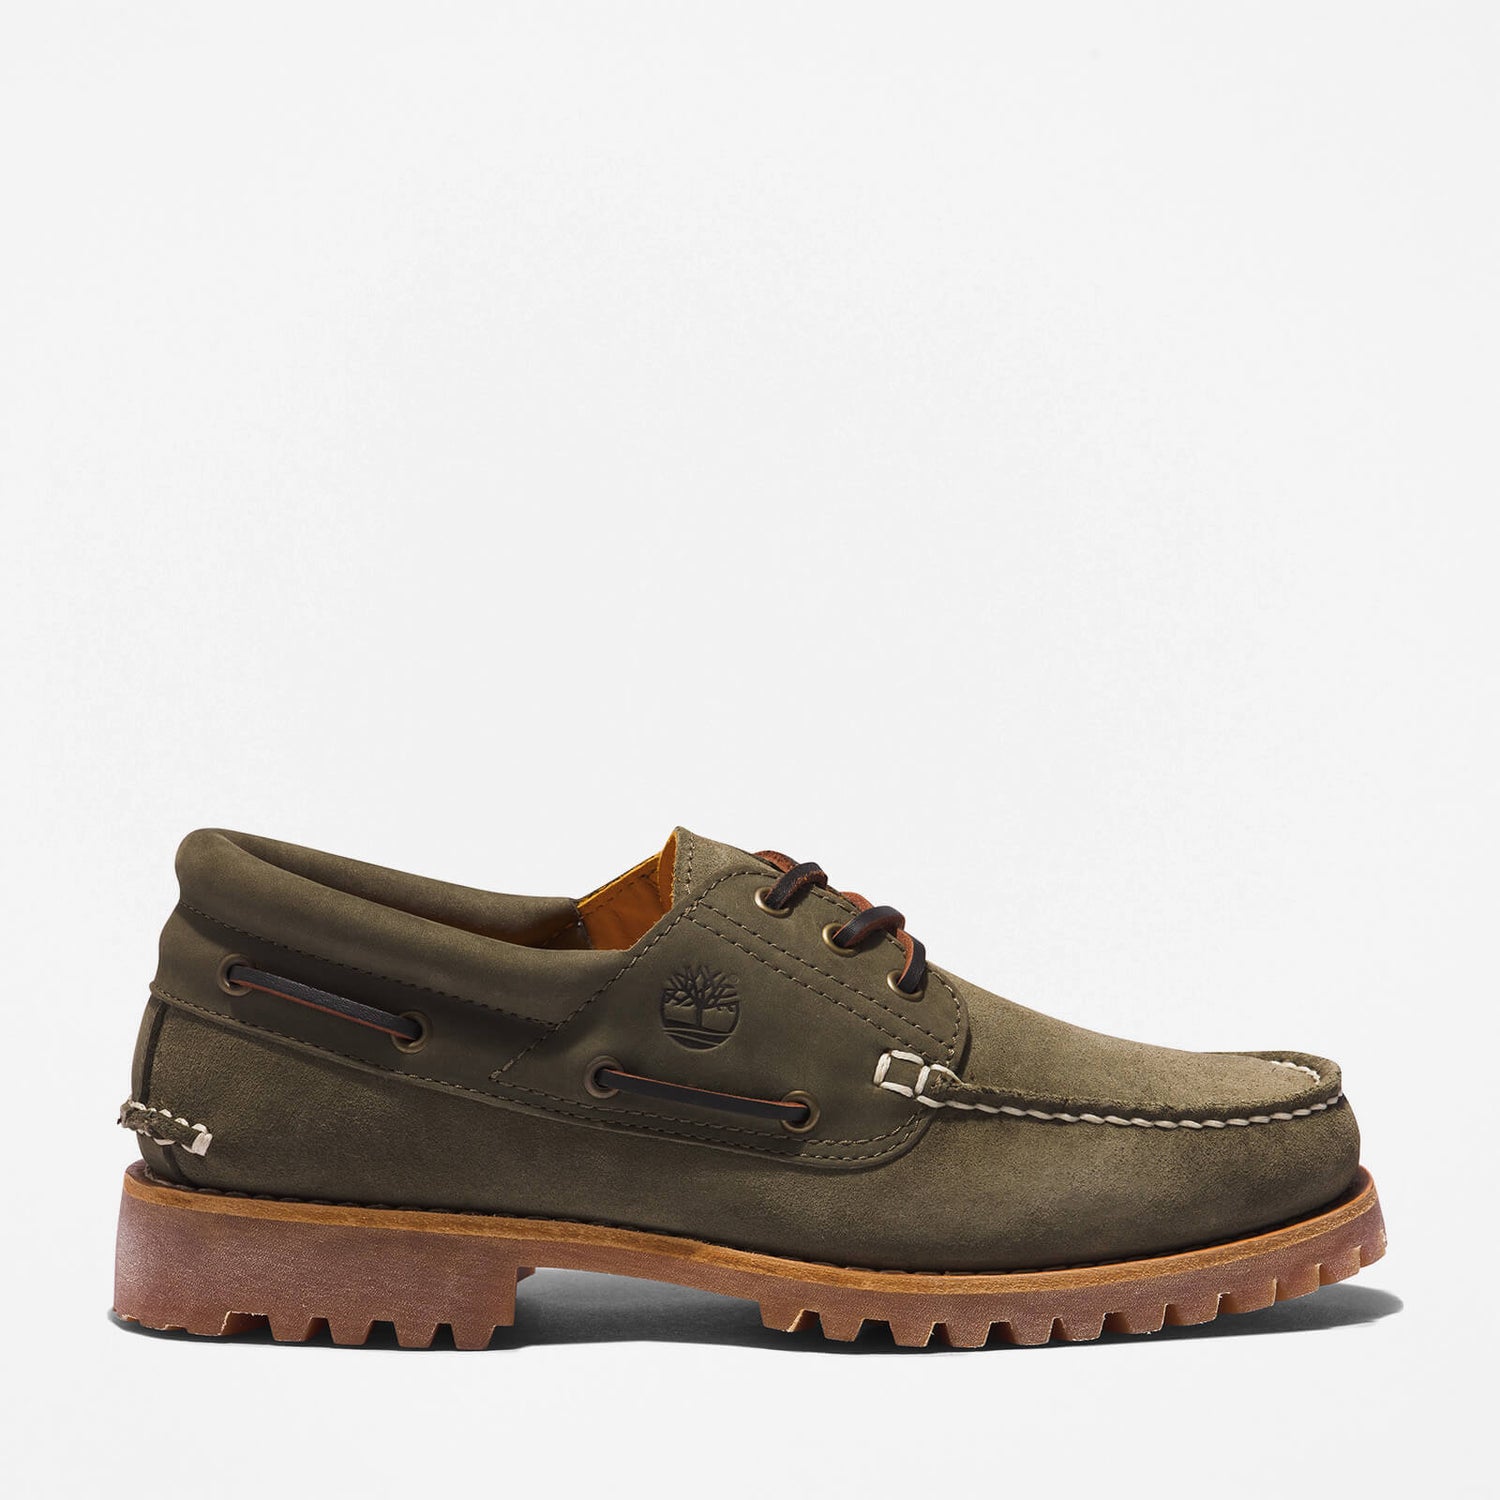 Timberland Men's Authentics 3 Eye Classic Lug Suede Boat Shoes - Dark Green